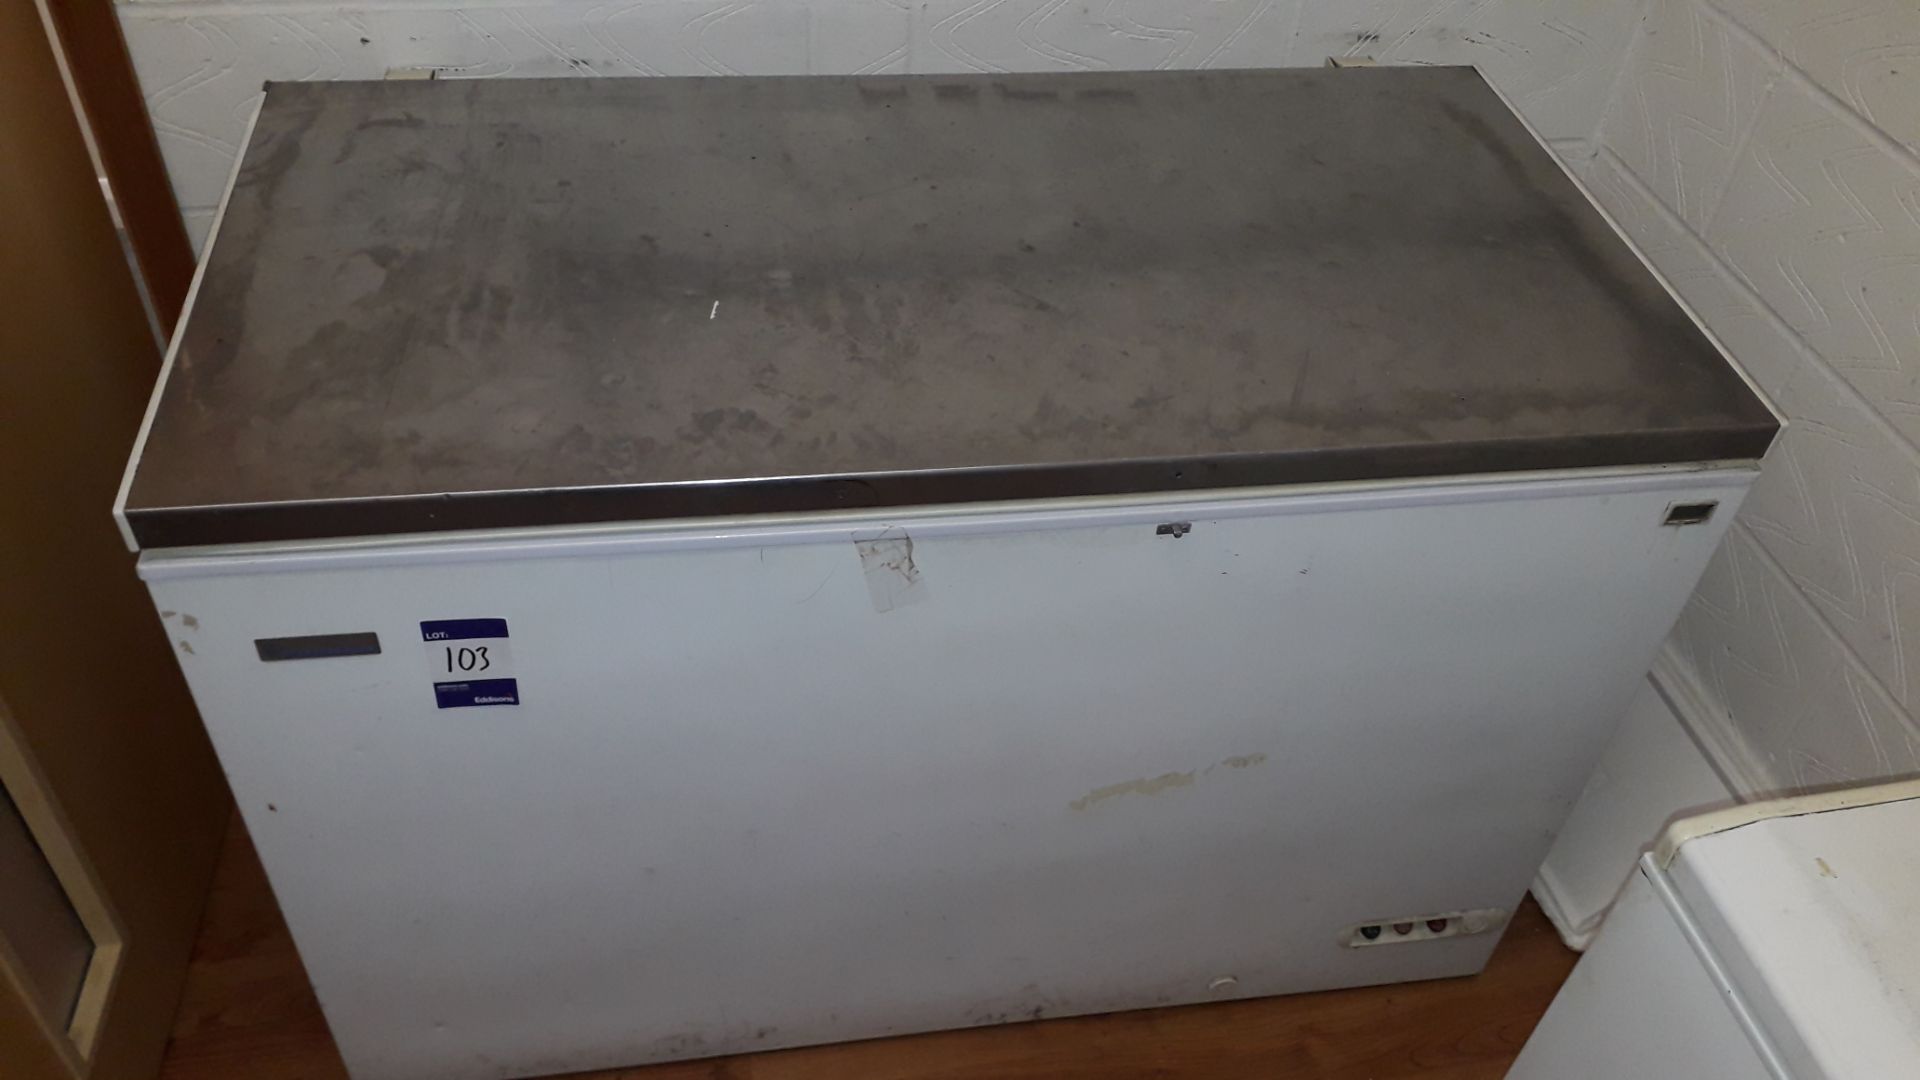 Elcold EL45SS Stainless Steel Lid 1300mm Chest Freezer Serial Number 03090609. Located at Fresco's